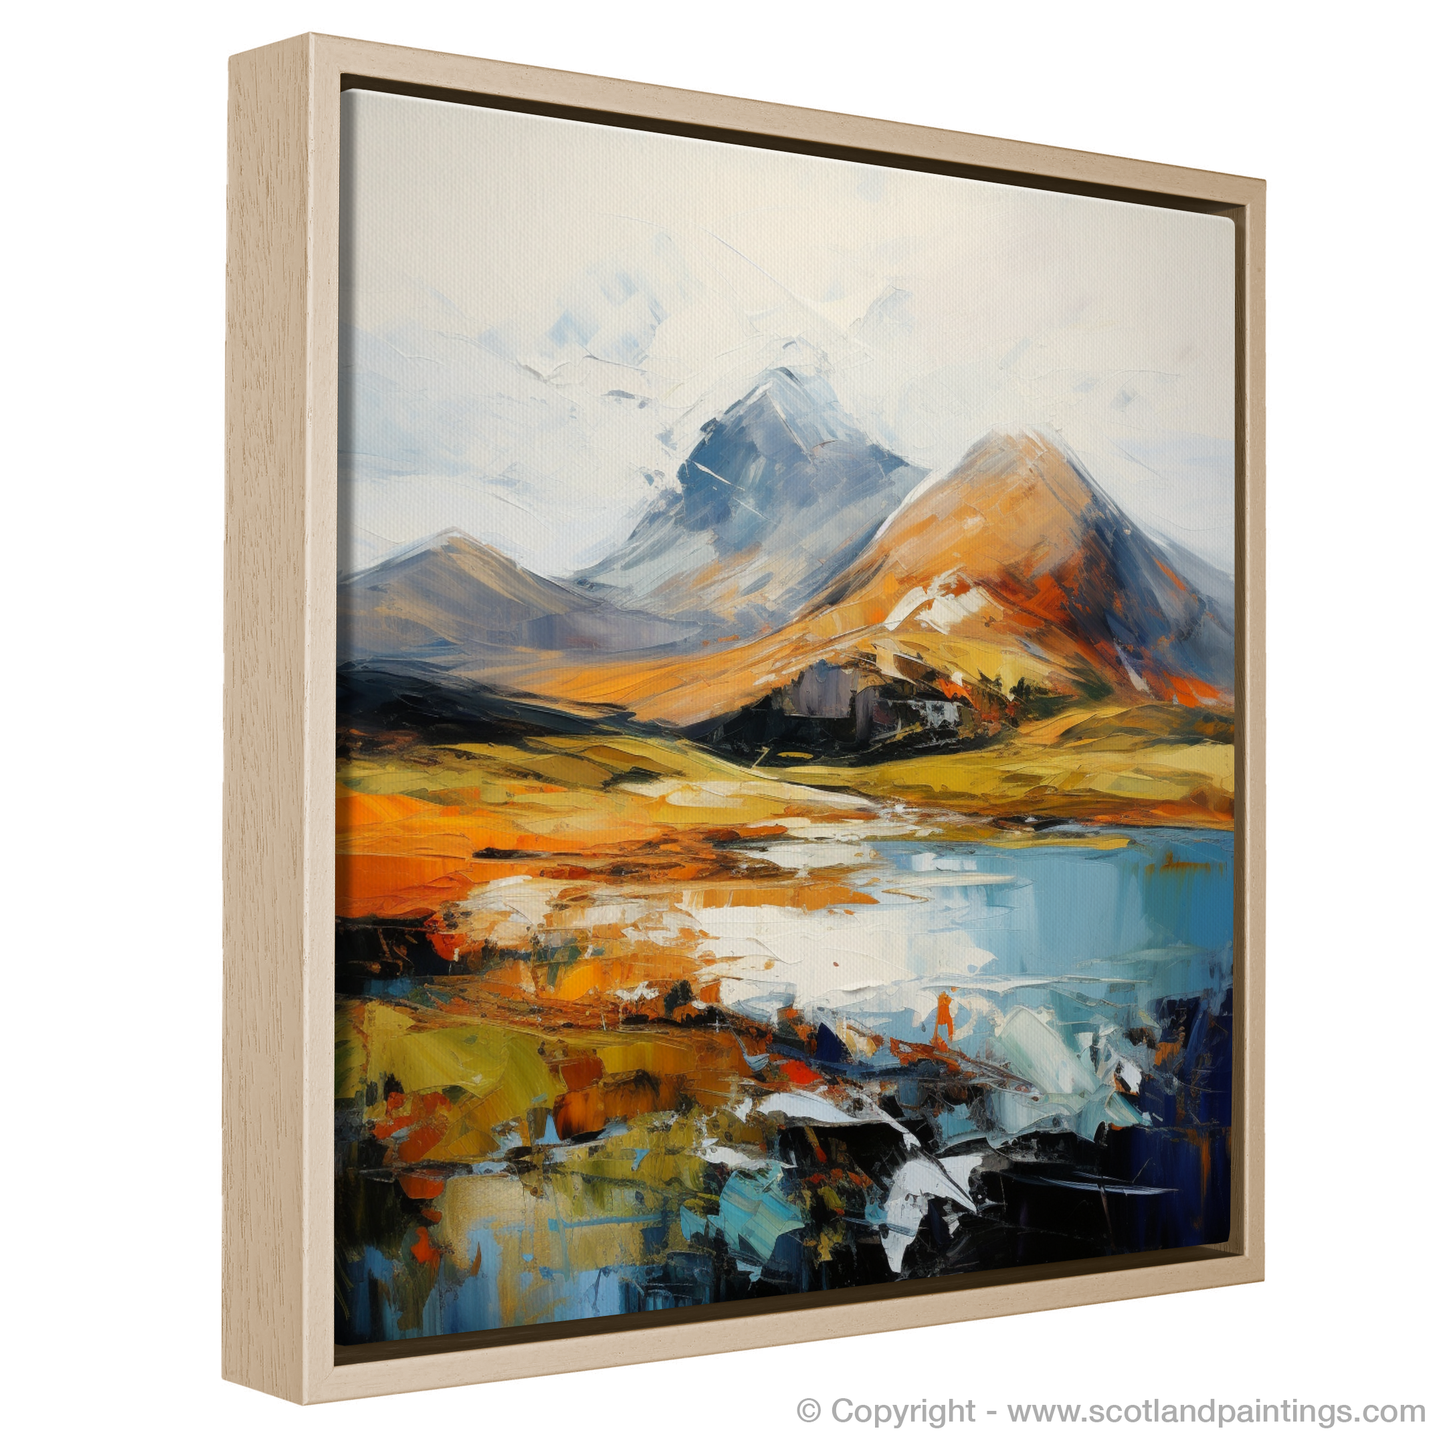 Painting and Art Print of Beinn Alligin, Wester Ross entitled "Majestic Alligin: An Expressionist Ode to the Scottish Highlands".